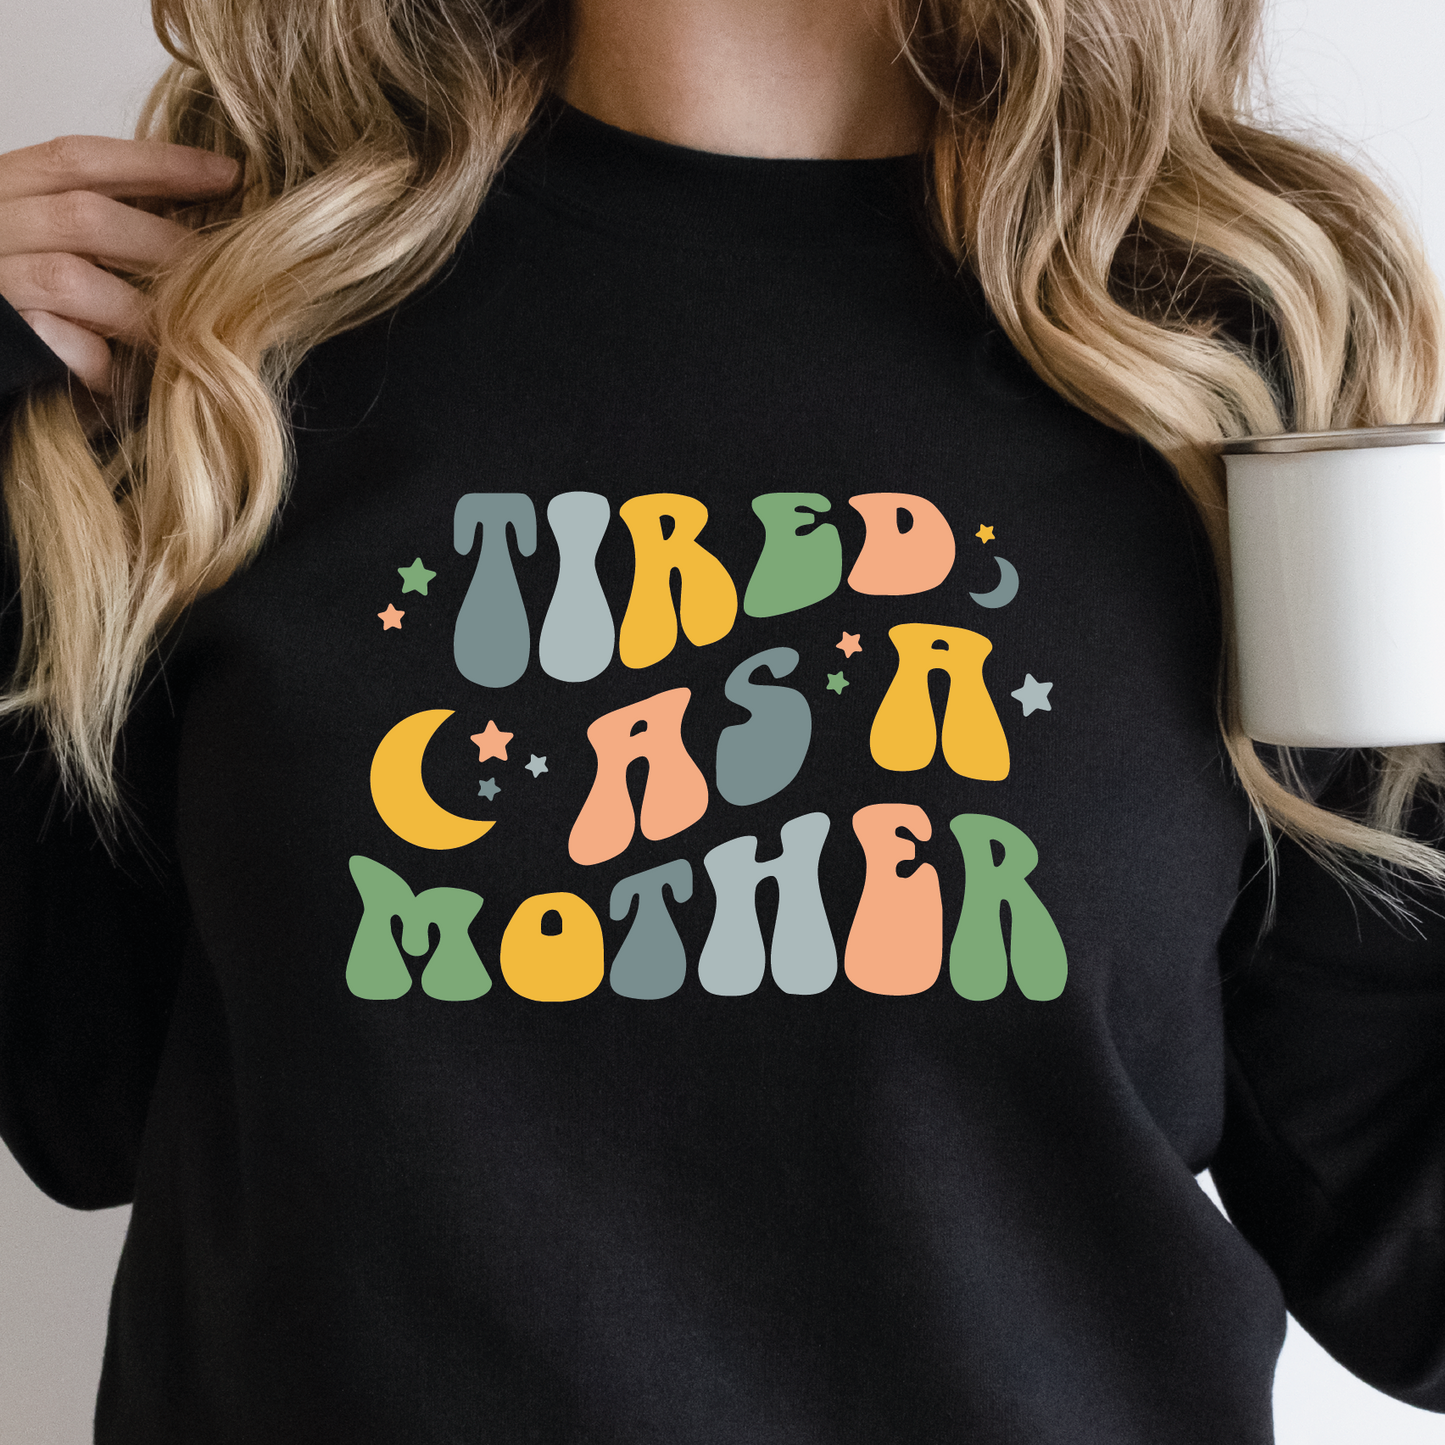 a woman is holding a coffee mug and wearing a black sweatshirt with the words tired